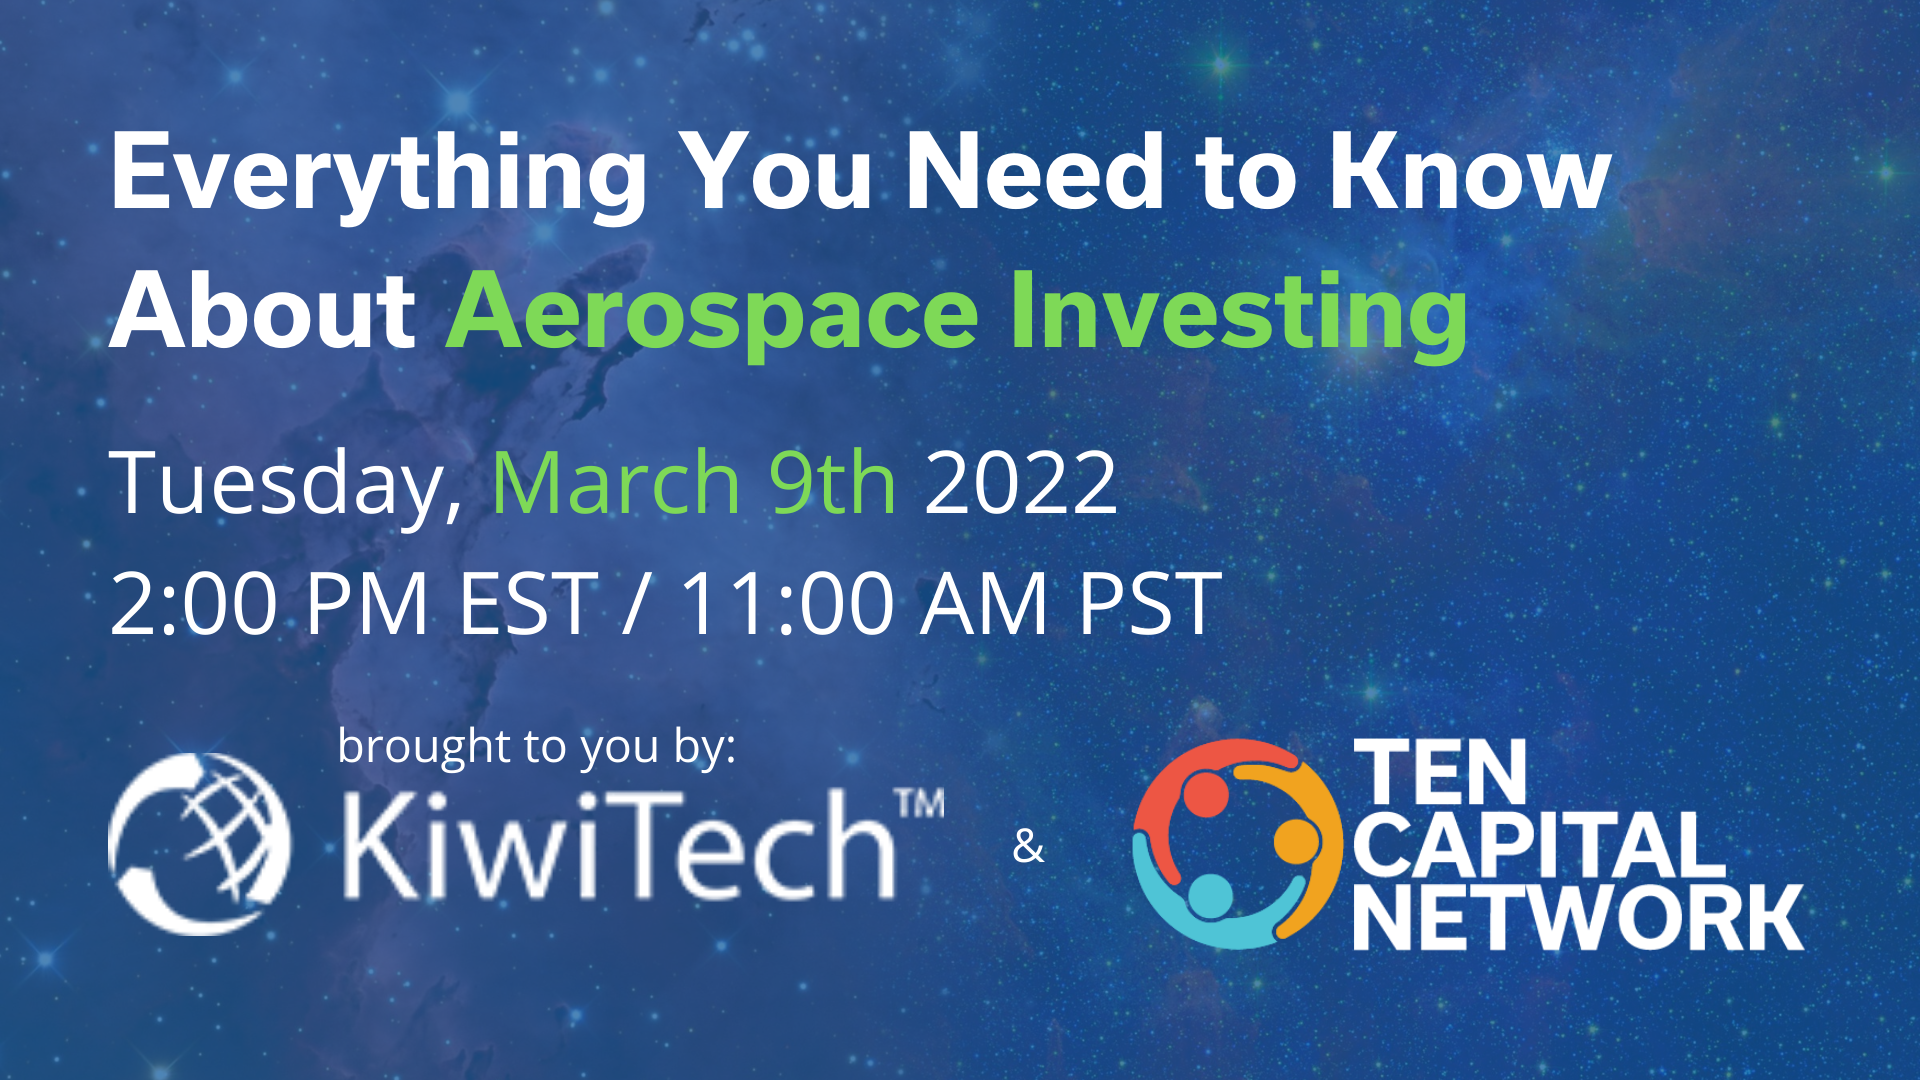 TEN Capital & KiwiTech Present: Everything You Need to Know About Aerospace Investing